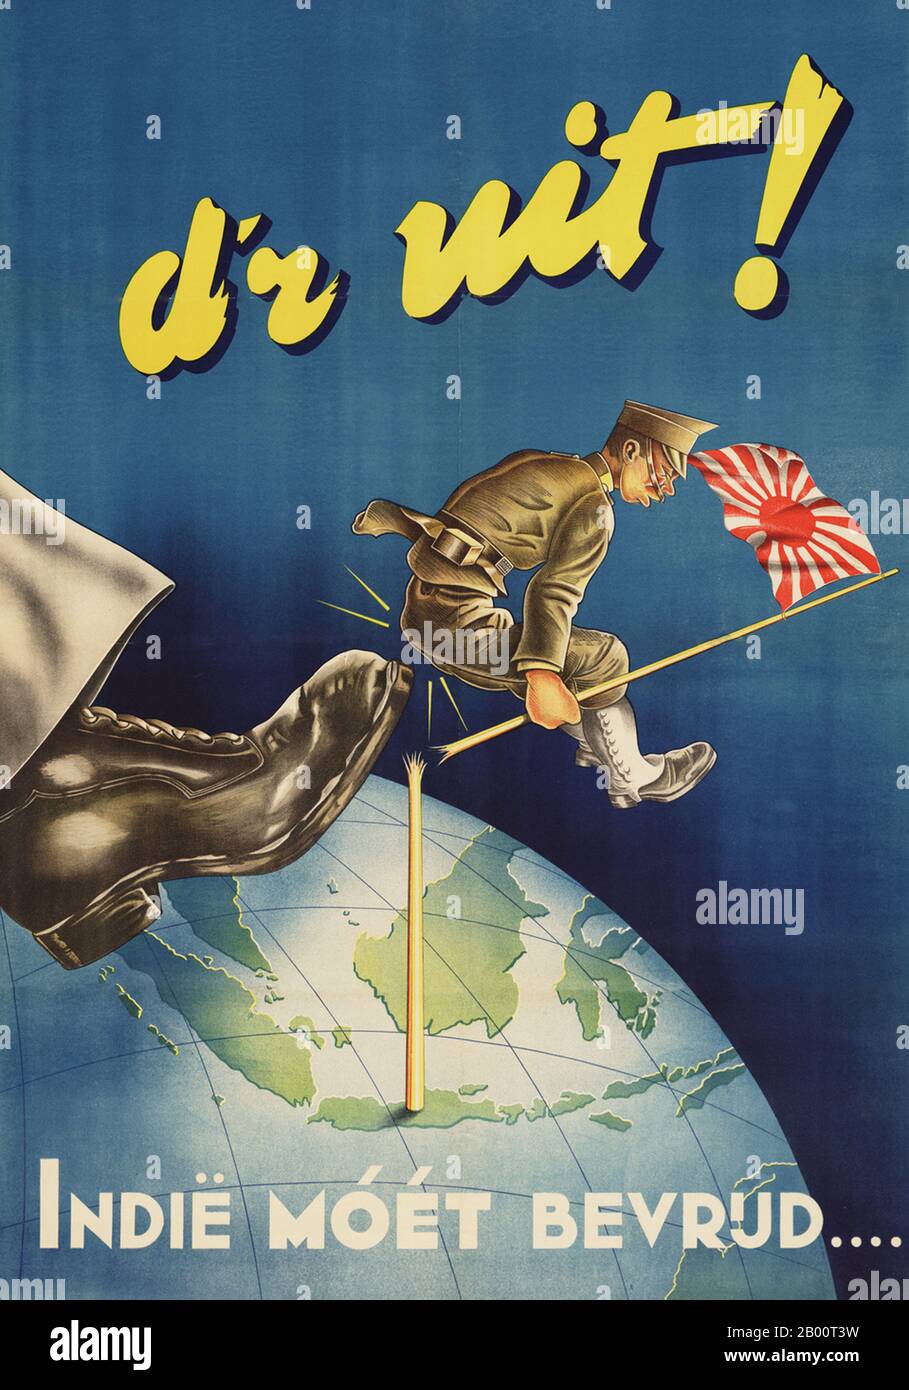 Indonesia/Netherlands: 'Get Out! The Indies Must be Liberated'.  This 1945 recruiting poster by the Dutch artist Nico Broekman shows a Japanese soldier being booted from the island of Java, and the caption, 'Get Out! The Indies Must Be Liberated.' During World War II, Japan occupied the Dutch East Indies in early 1942. After the surrender, a large number of Dutch submarines and some aircraft escaped to Australia and continued to fight as part of Australian units. In the course of the war, Indonesian nationalists supported by the Japanese took over parts of the country. Stock Photo